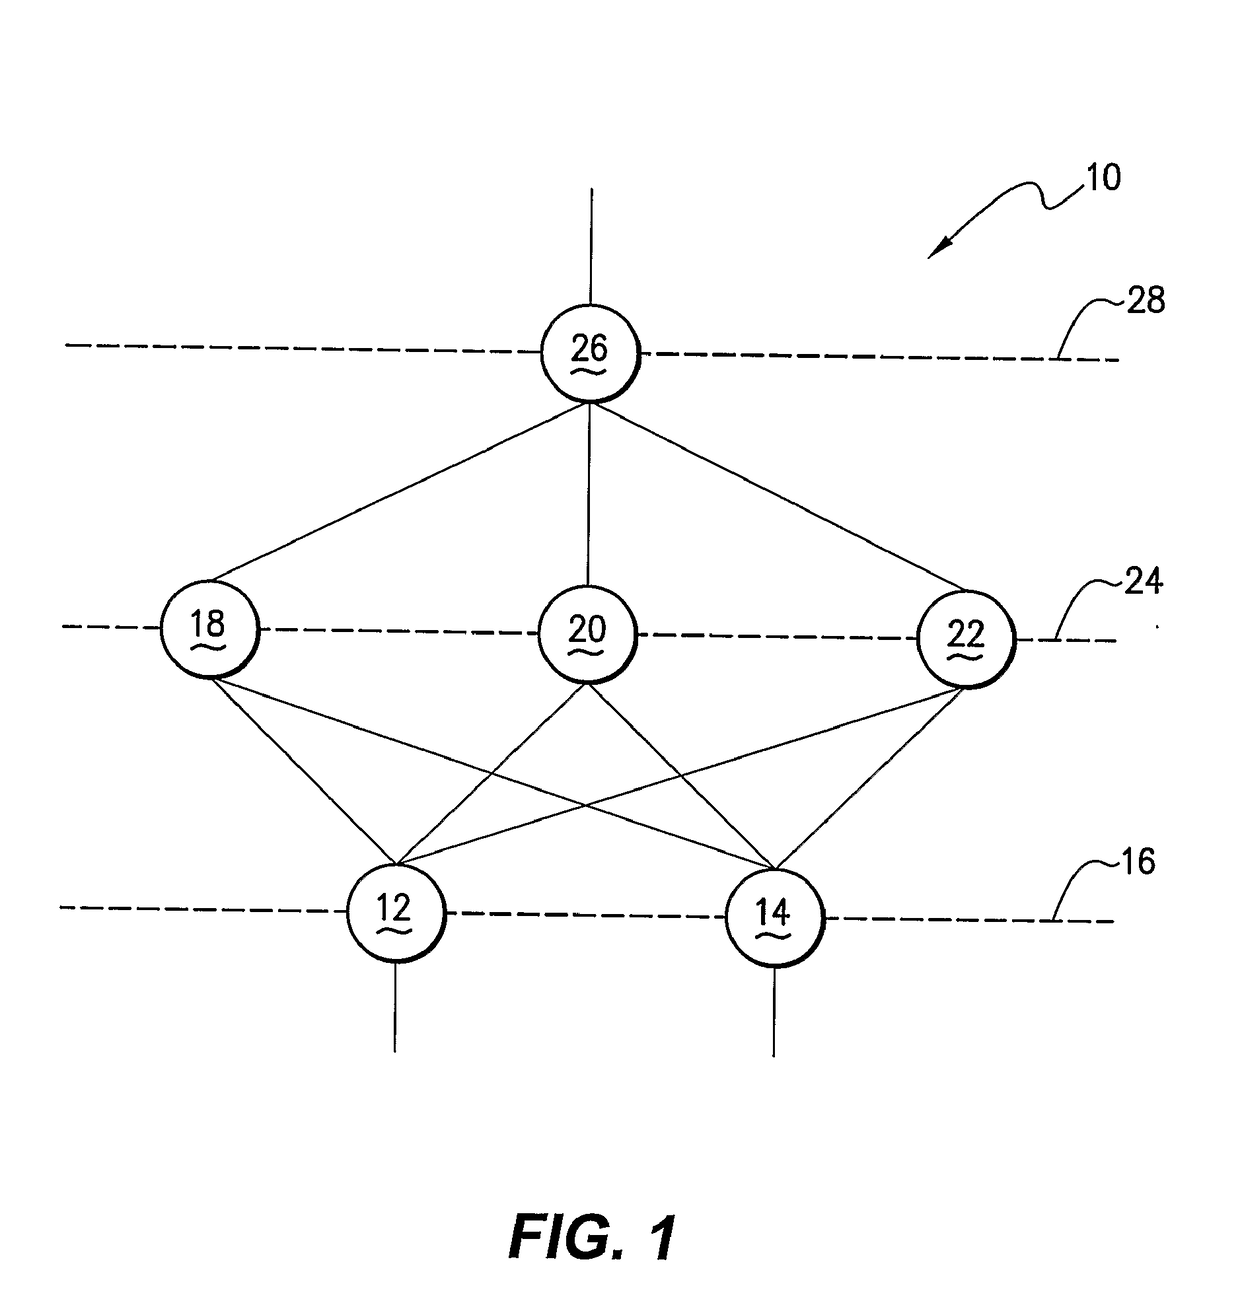 Neural network, computer readable medium, and methods including a method for training a neural network